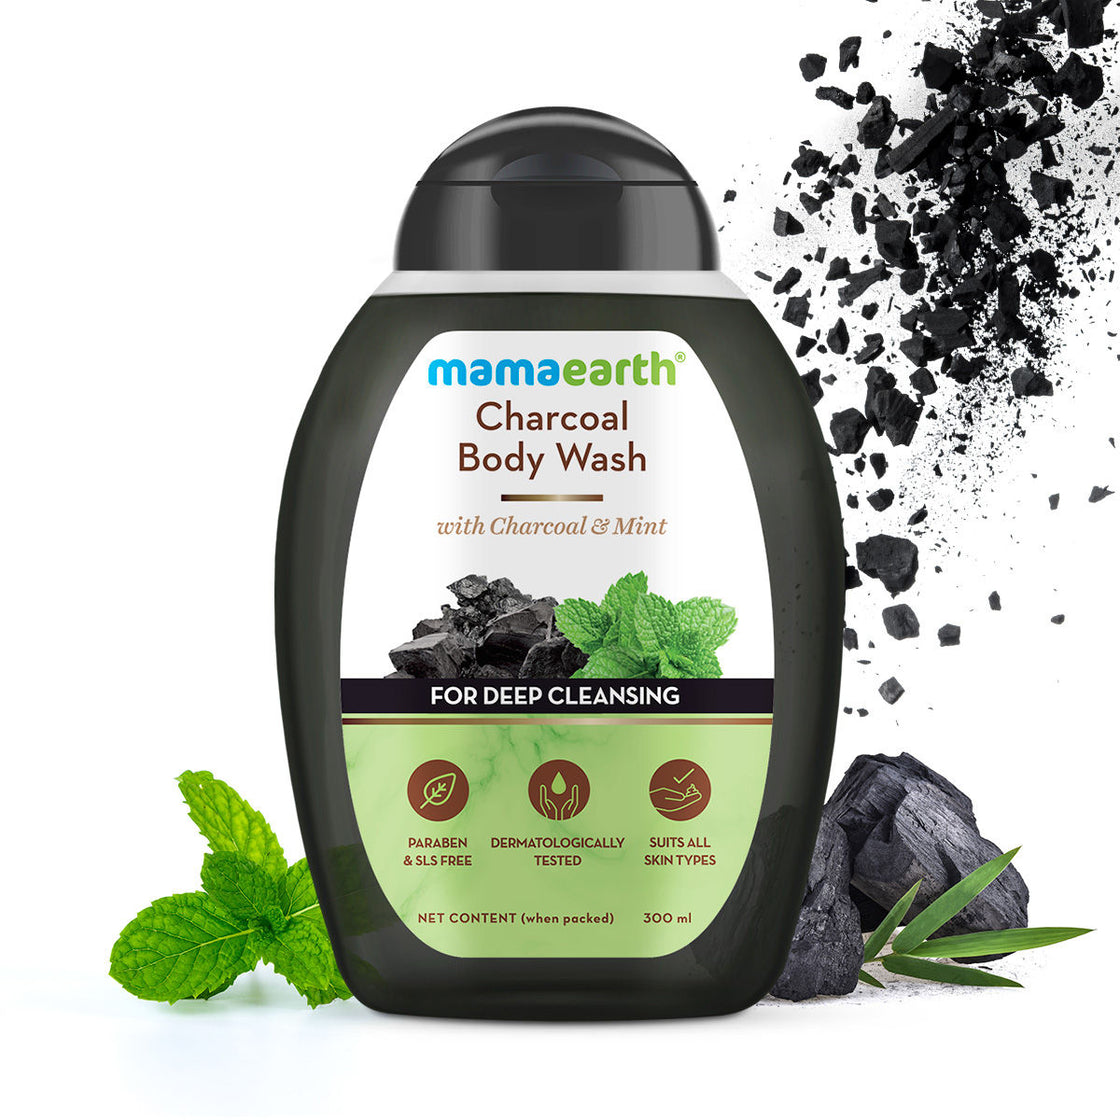 Mamaearth Charcoal Body Wash With Charcoal & Mint For Deep Cleansing